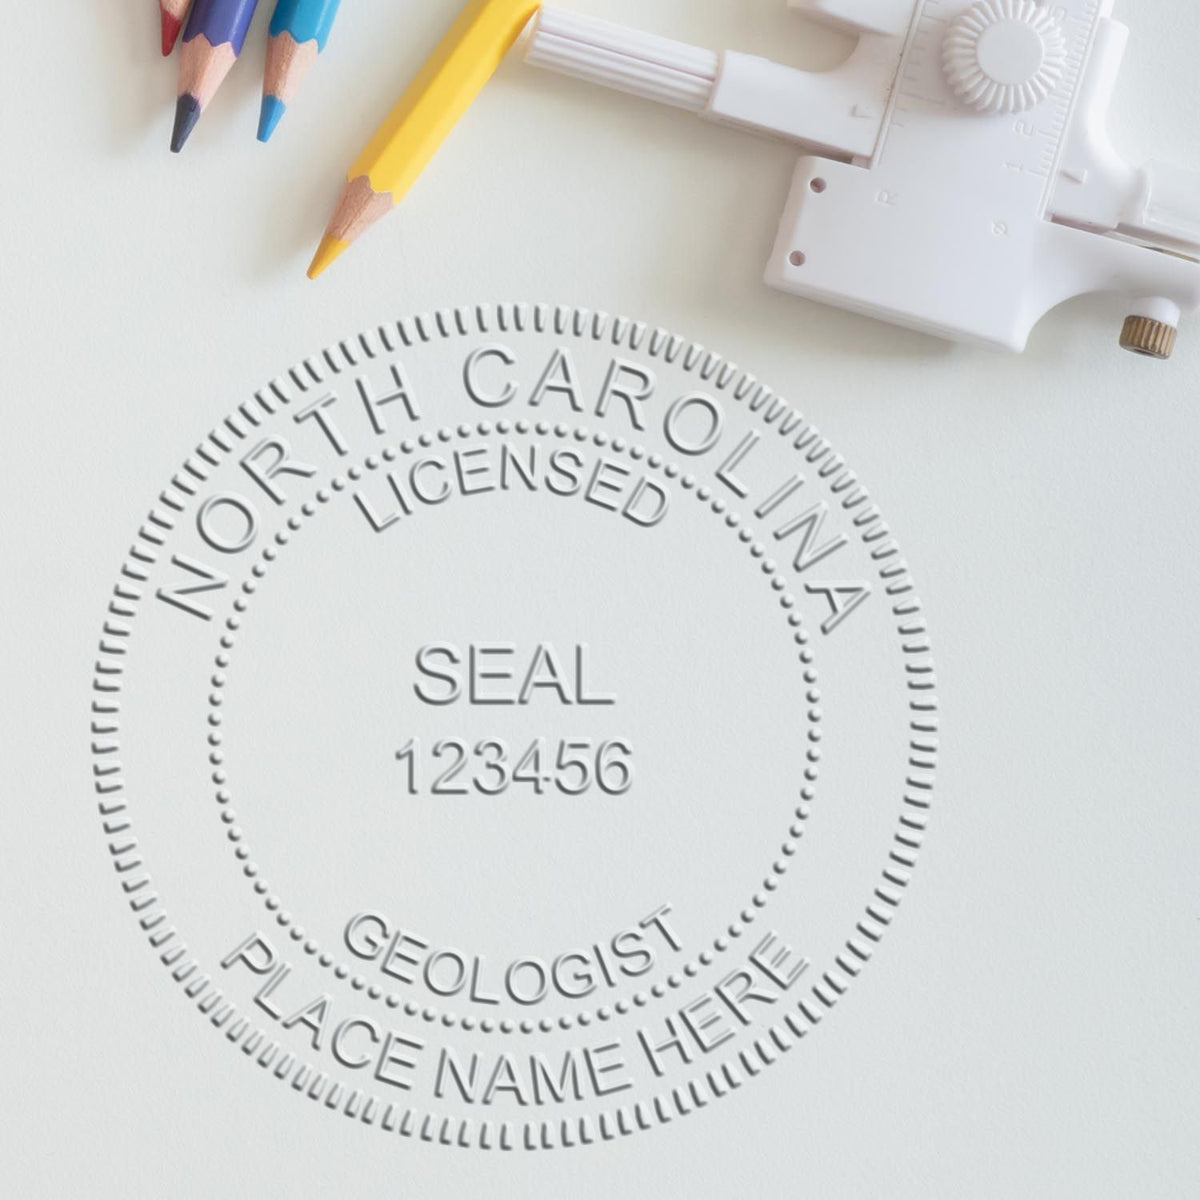 An alternative view of the Soft North Carolina Professional Geologist Seal stamped on a sheet of paper showing the image in use